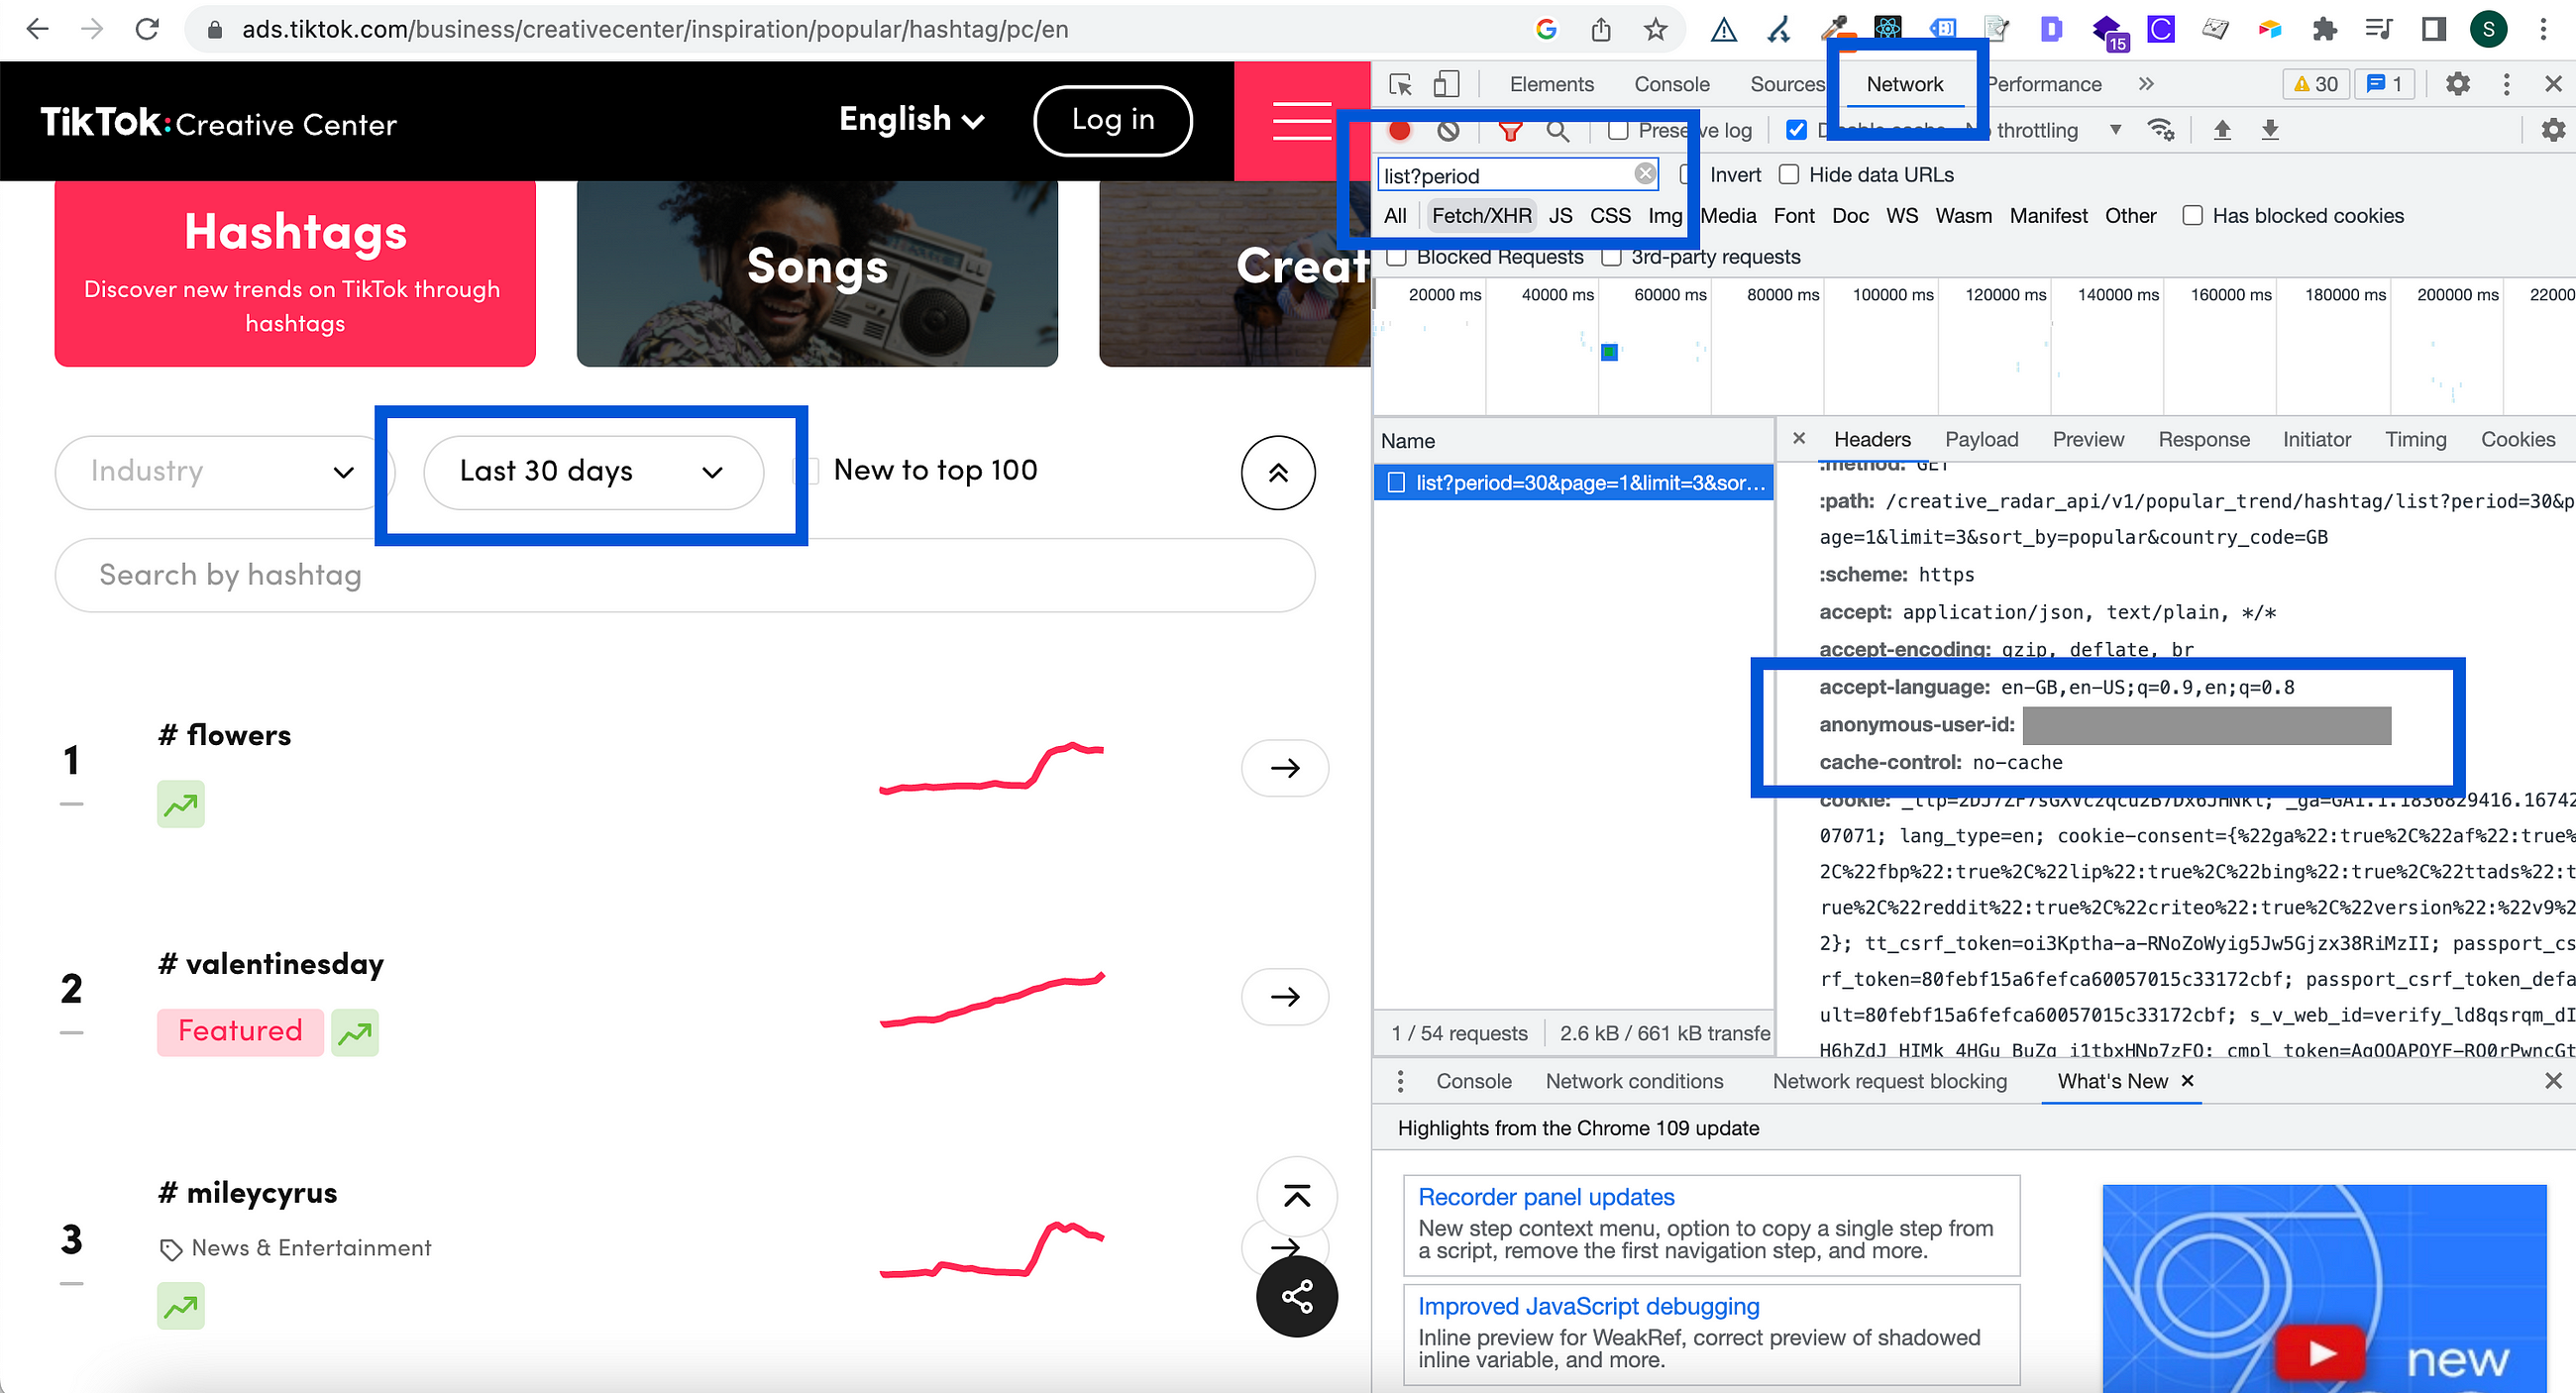 How to import TikTok trend data into Google sheets